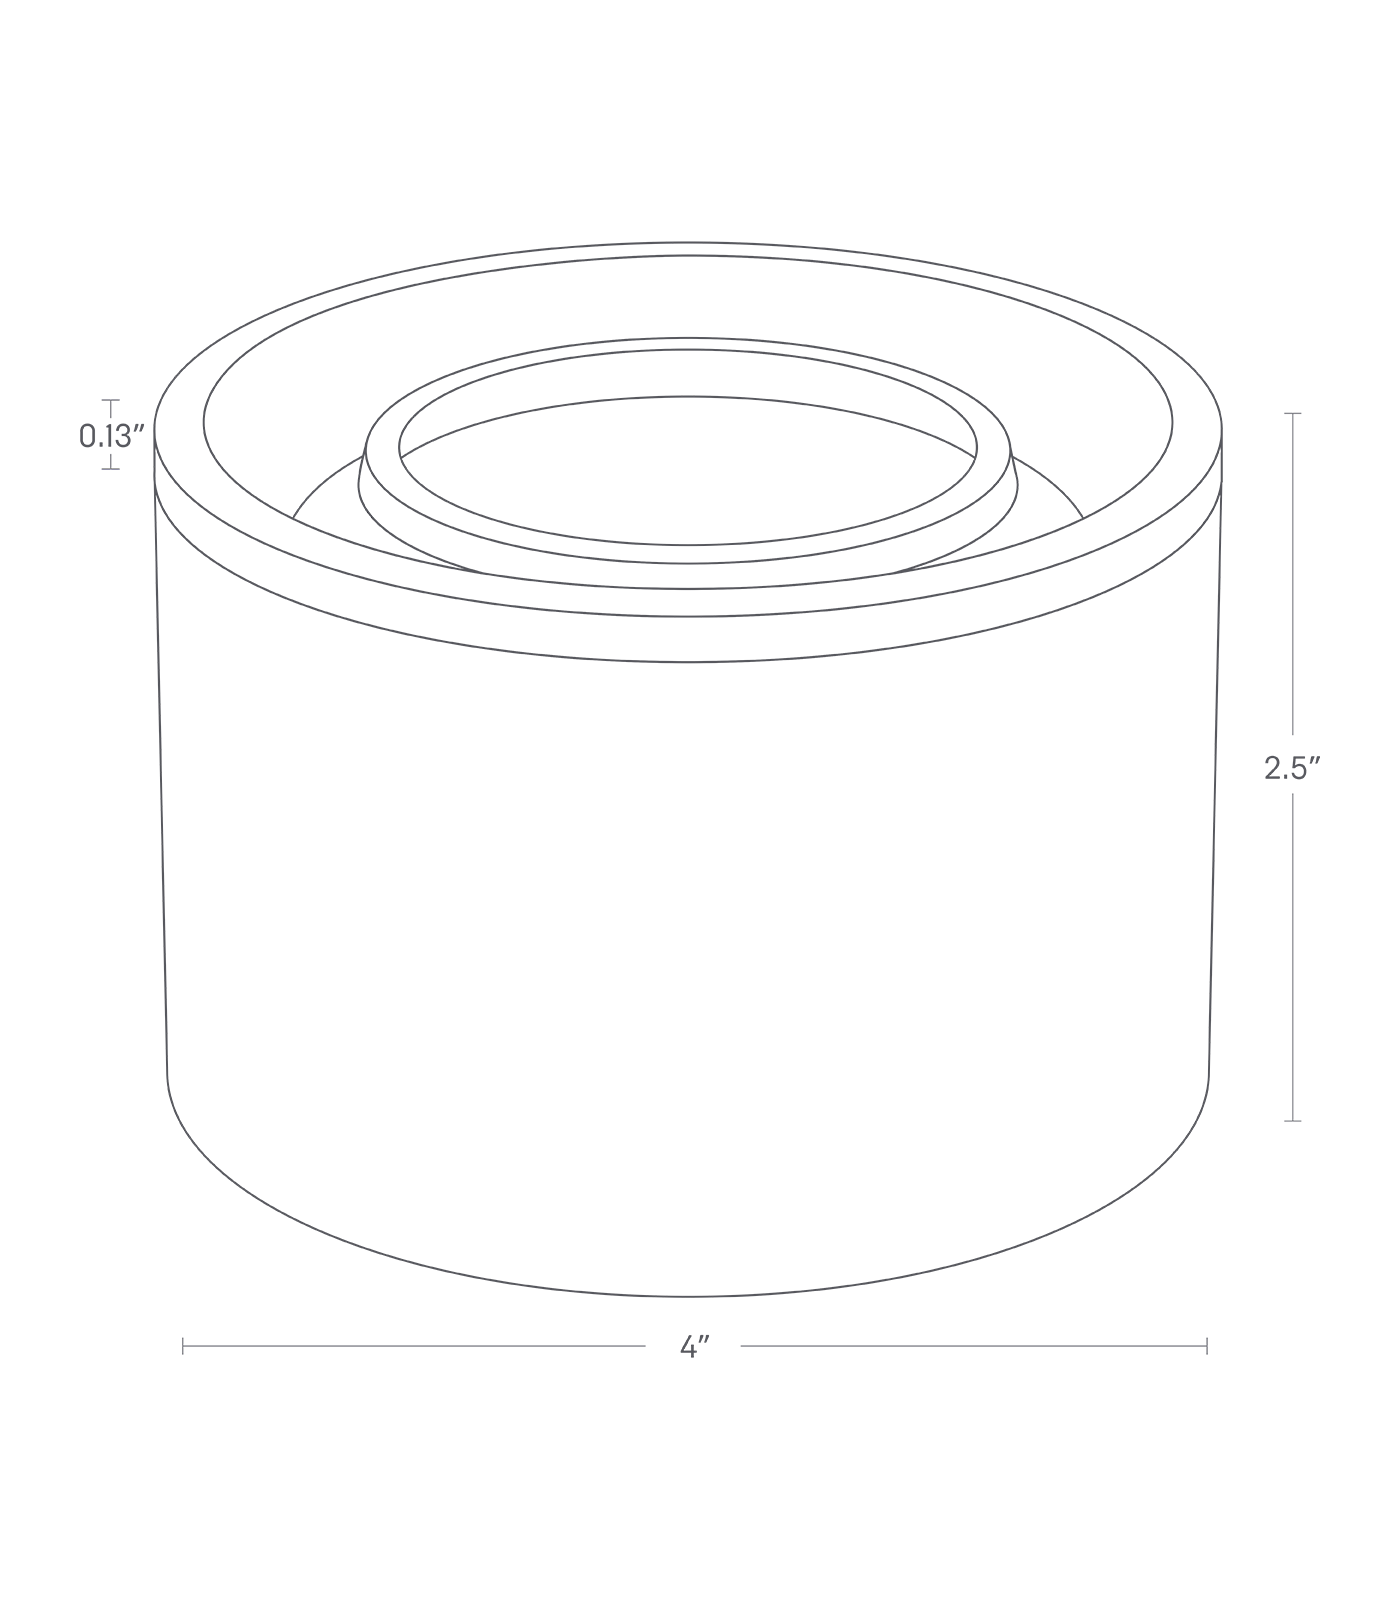 Dimenision image for Ceramic Canister - Two Sizeson a white background showing total width and length of 4